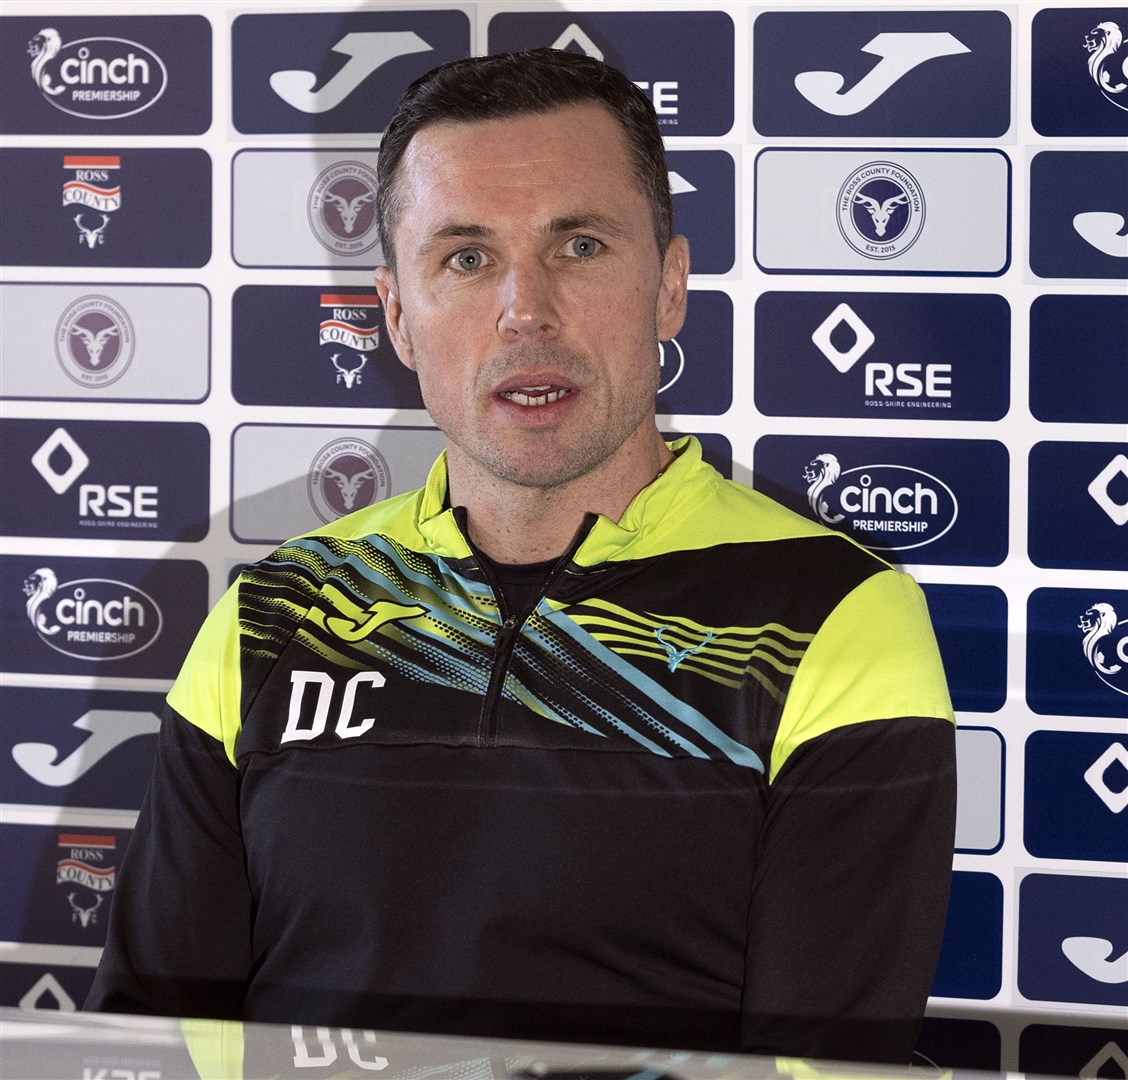 Ross County interim manager Don Cowie speaks to the media on Monday ahead of Wednesday night’s game against Rangers..